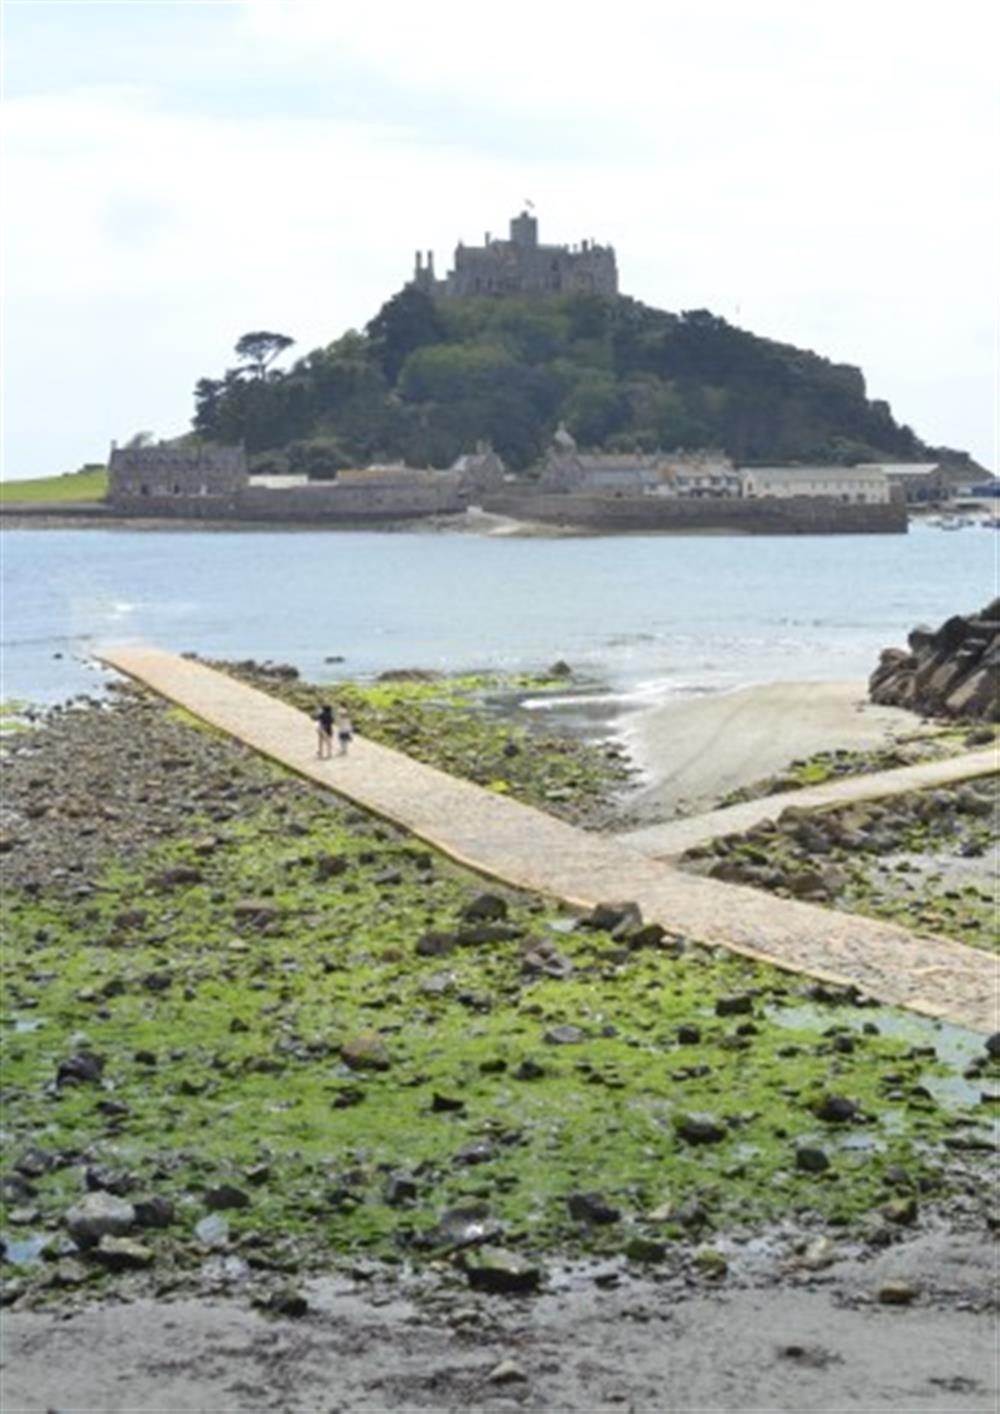 St Michael's Mount in Marazion is just a 45 minute drive away.